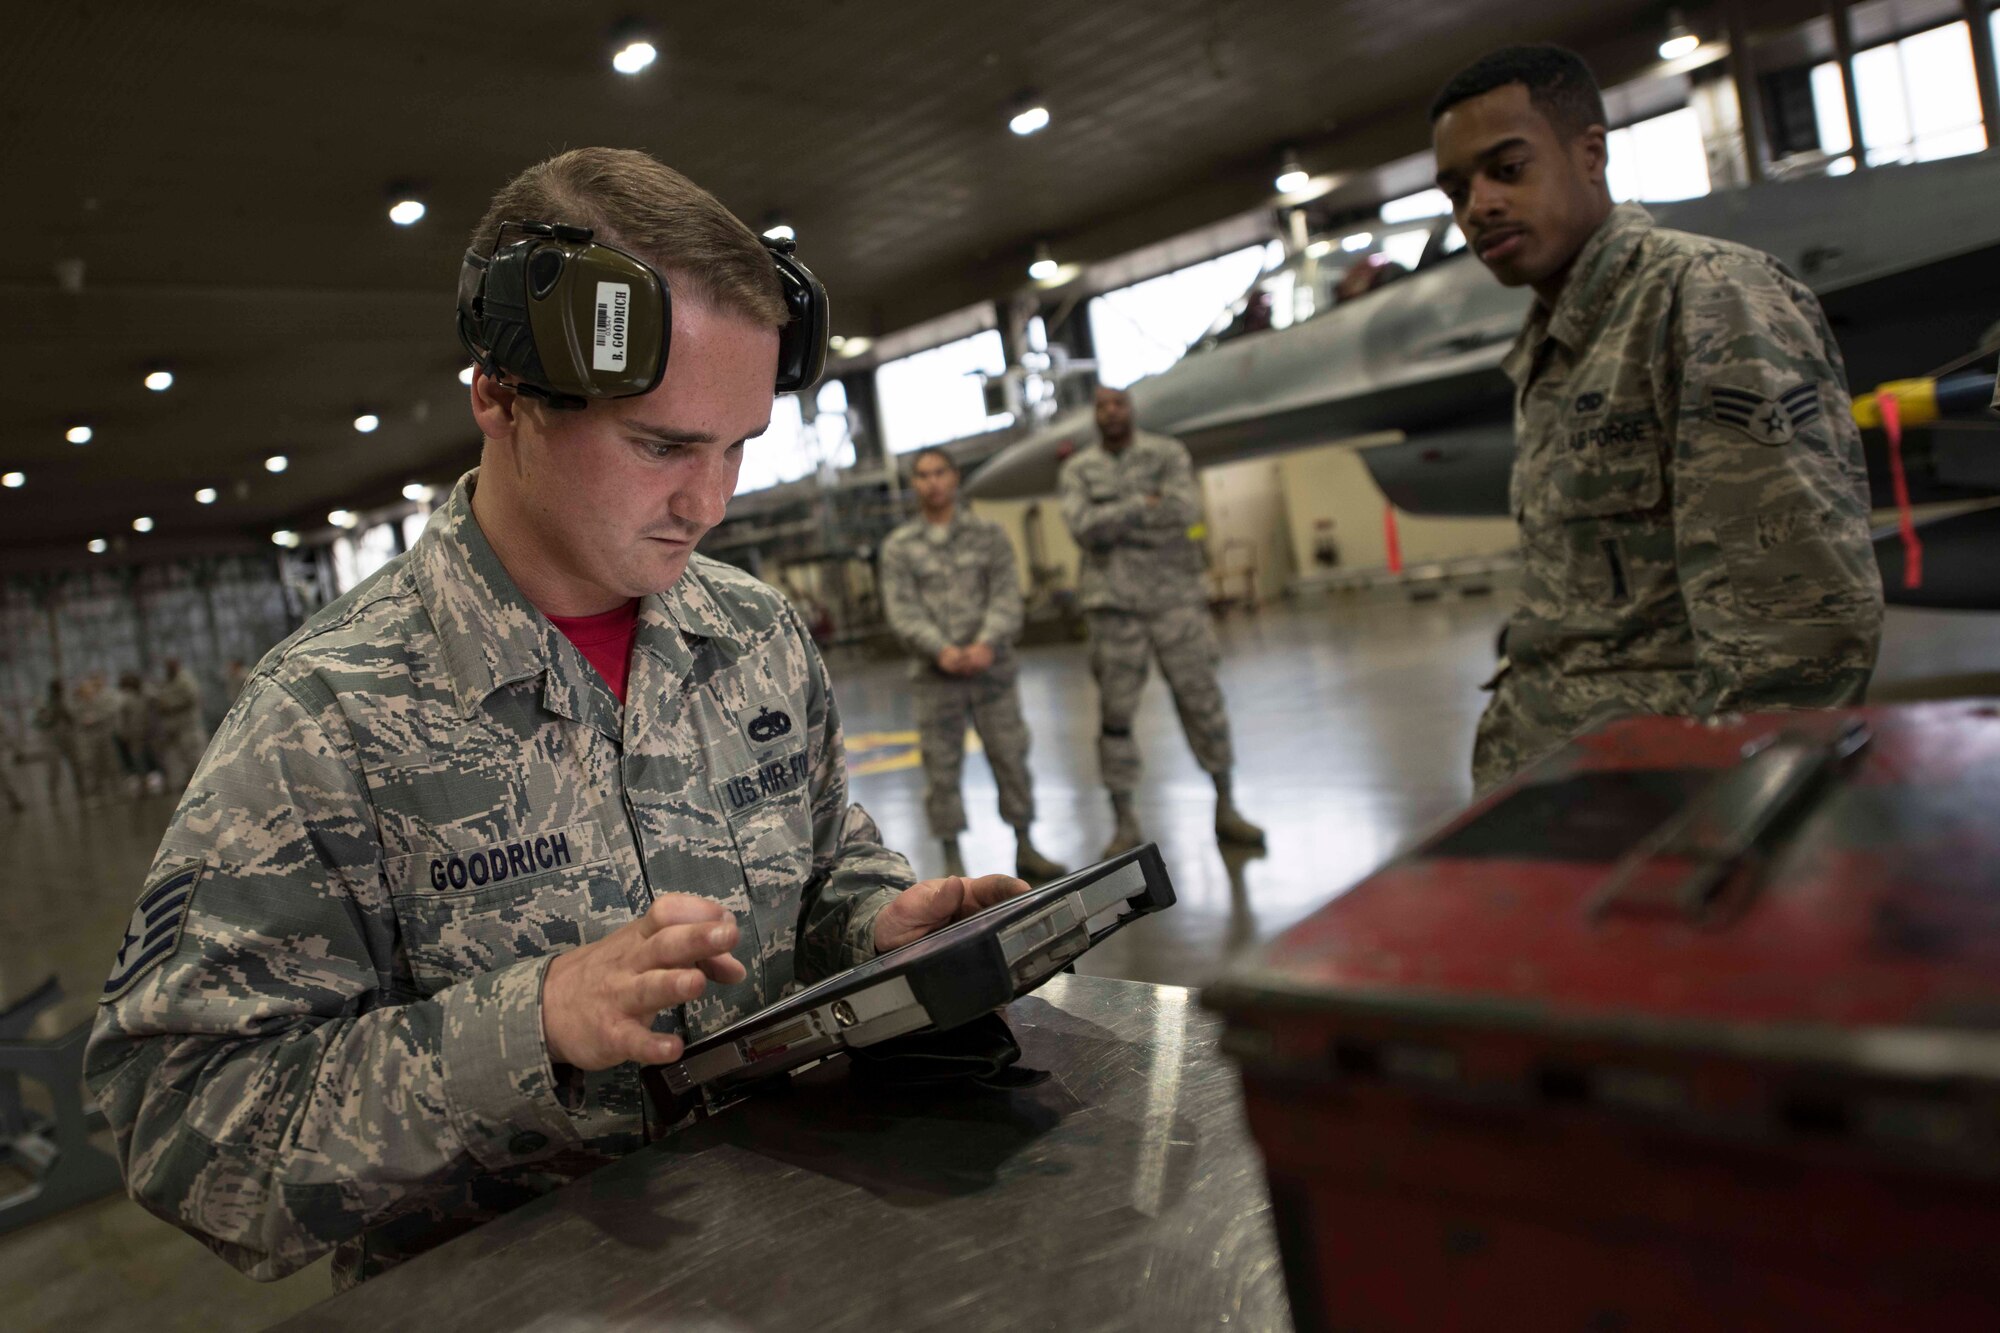 U.S. Air Force Staff Sgt. Branden Goodrich, left, a load crew team chief, and Senior Airman Travonne Lindsay, right, a load crew member, both with the 13th Aircraft Maintenance Unit, review technical orders during the third quarter load competition at Misawa Air Base, Japan, Nov. 9, 2018. During the competition, Airmen raced against the clock to see which team could efficiently and accurately load munitions onto an F-16 Fighting Falcon. (U.S. Air Force photo by Airman 1st Class Collette Brooks)